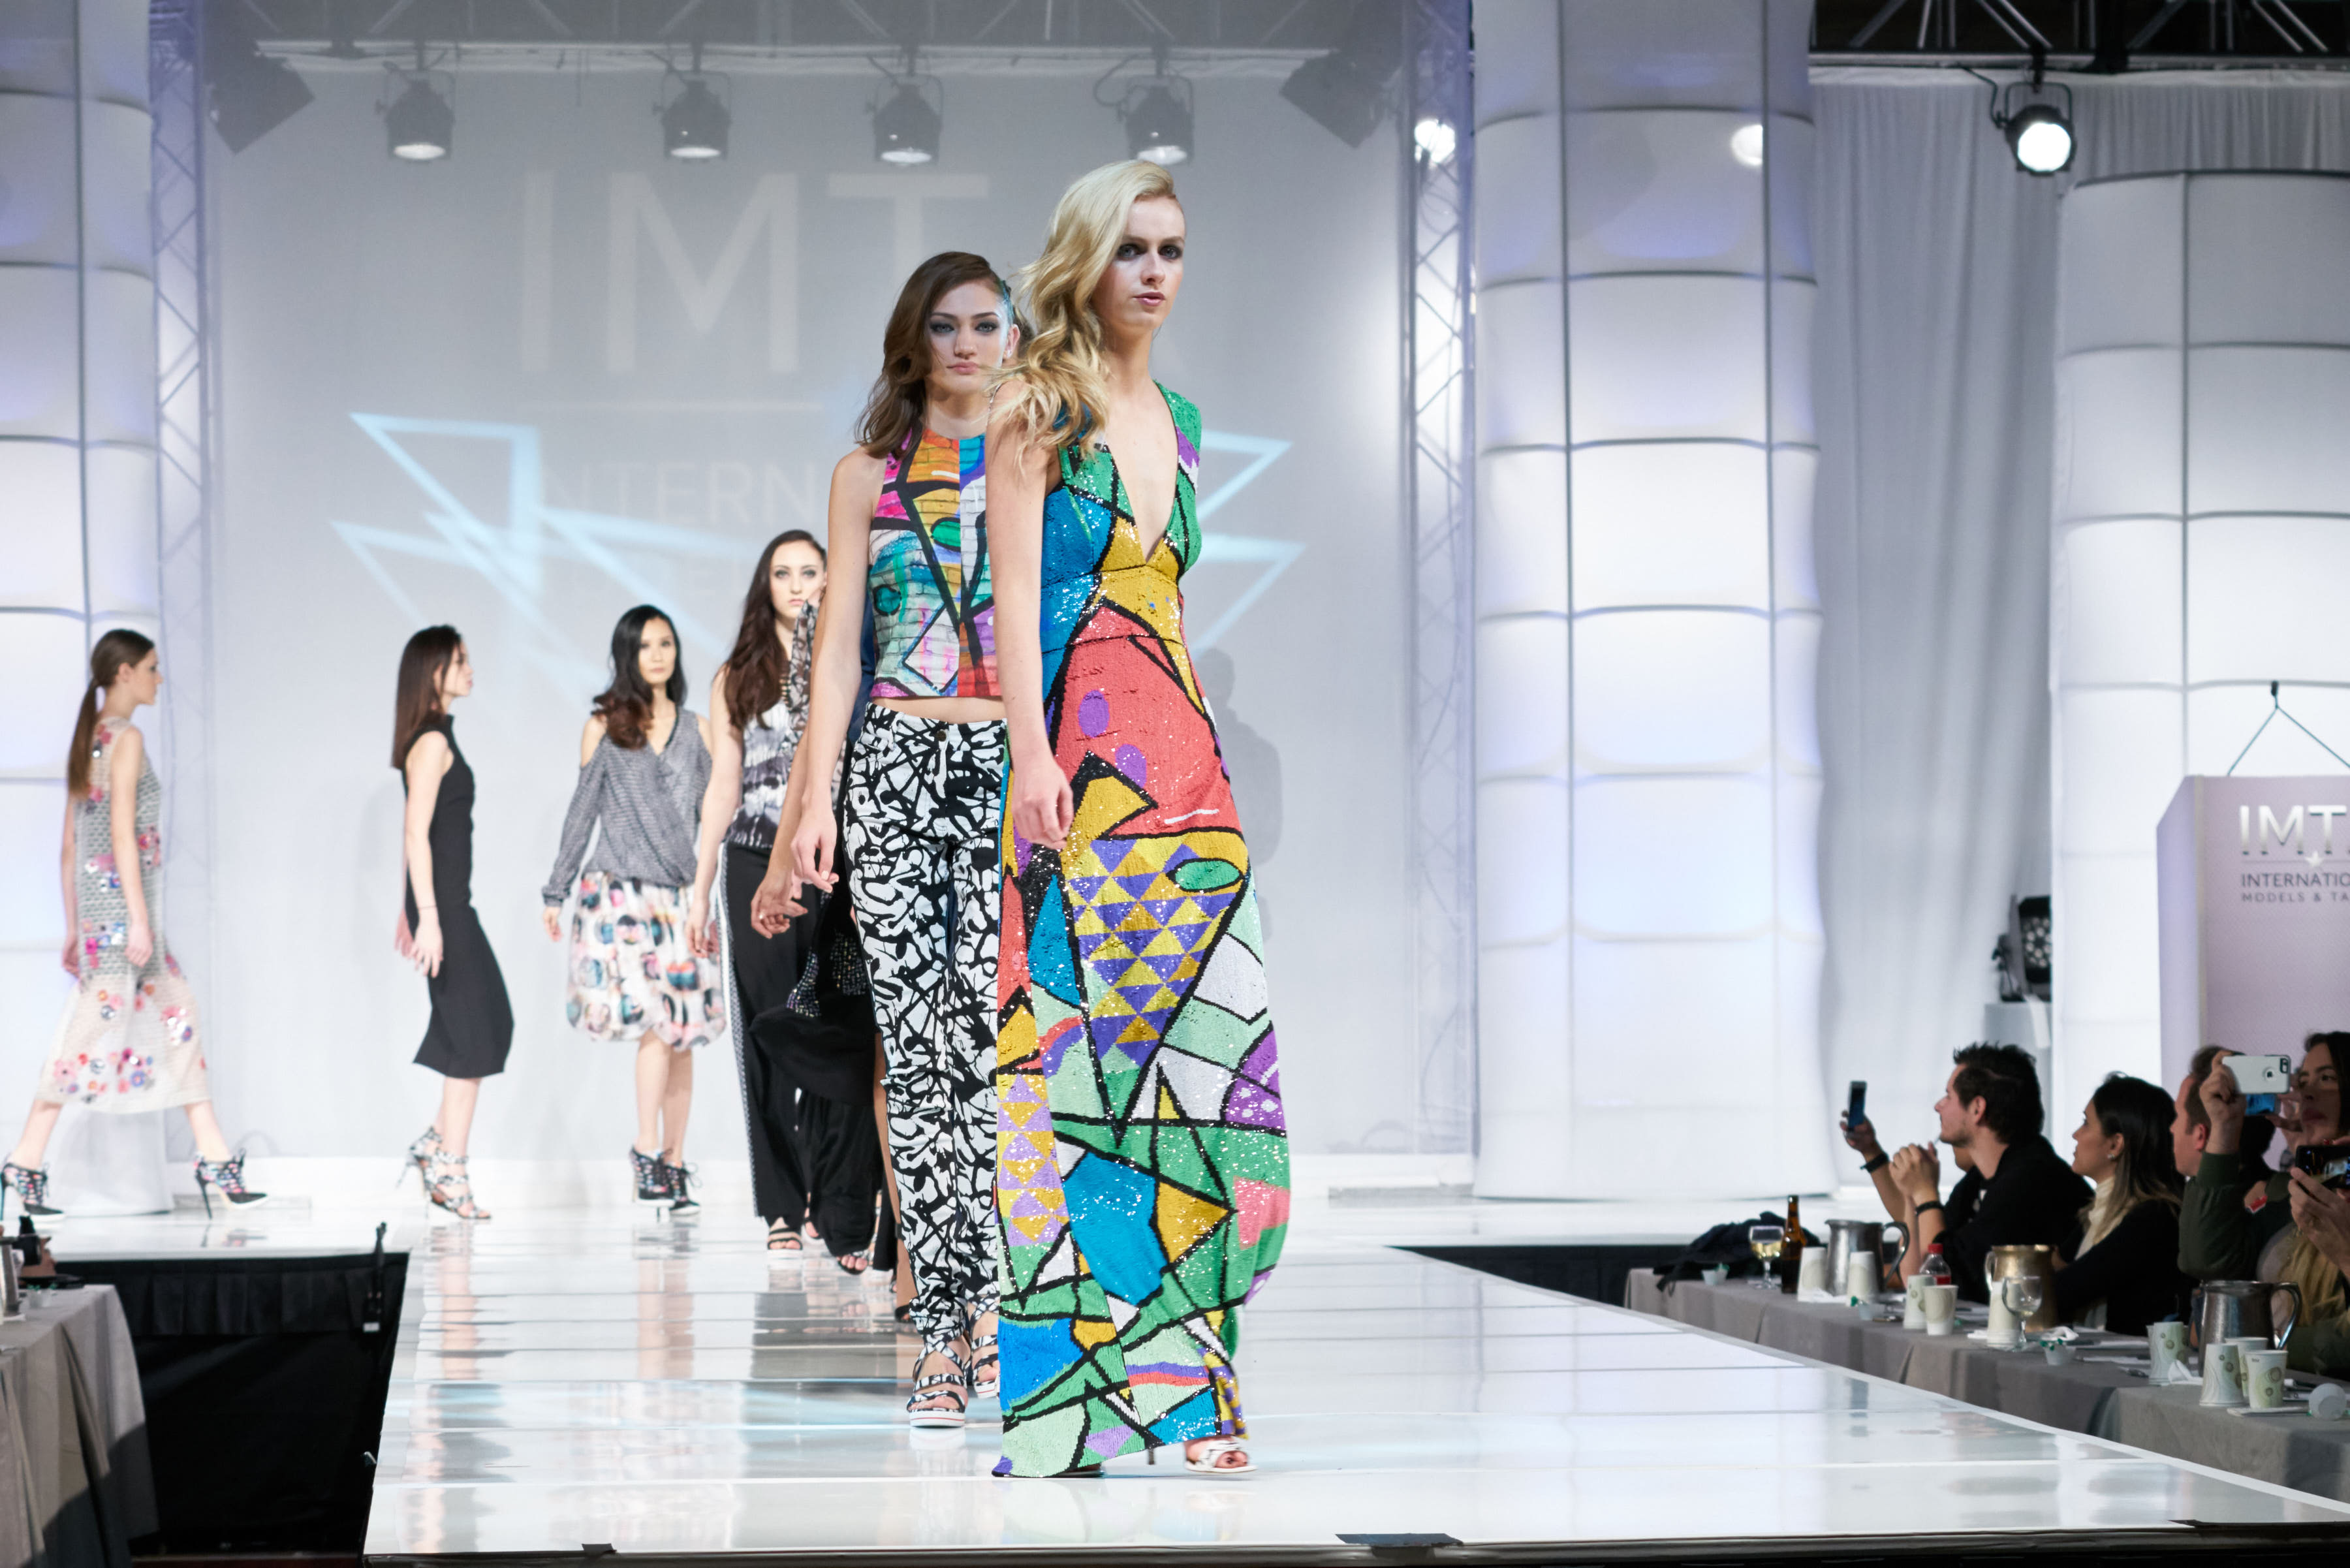 IMTA Contestants walk in the designer fashion show produced by Curtis Davis